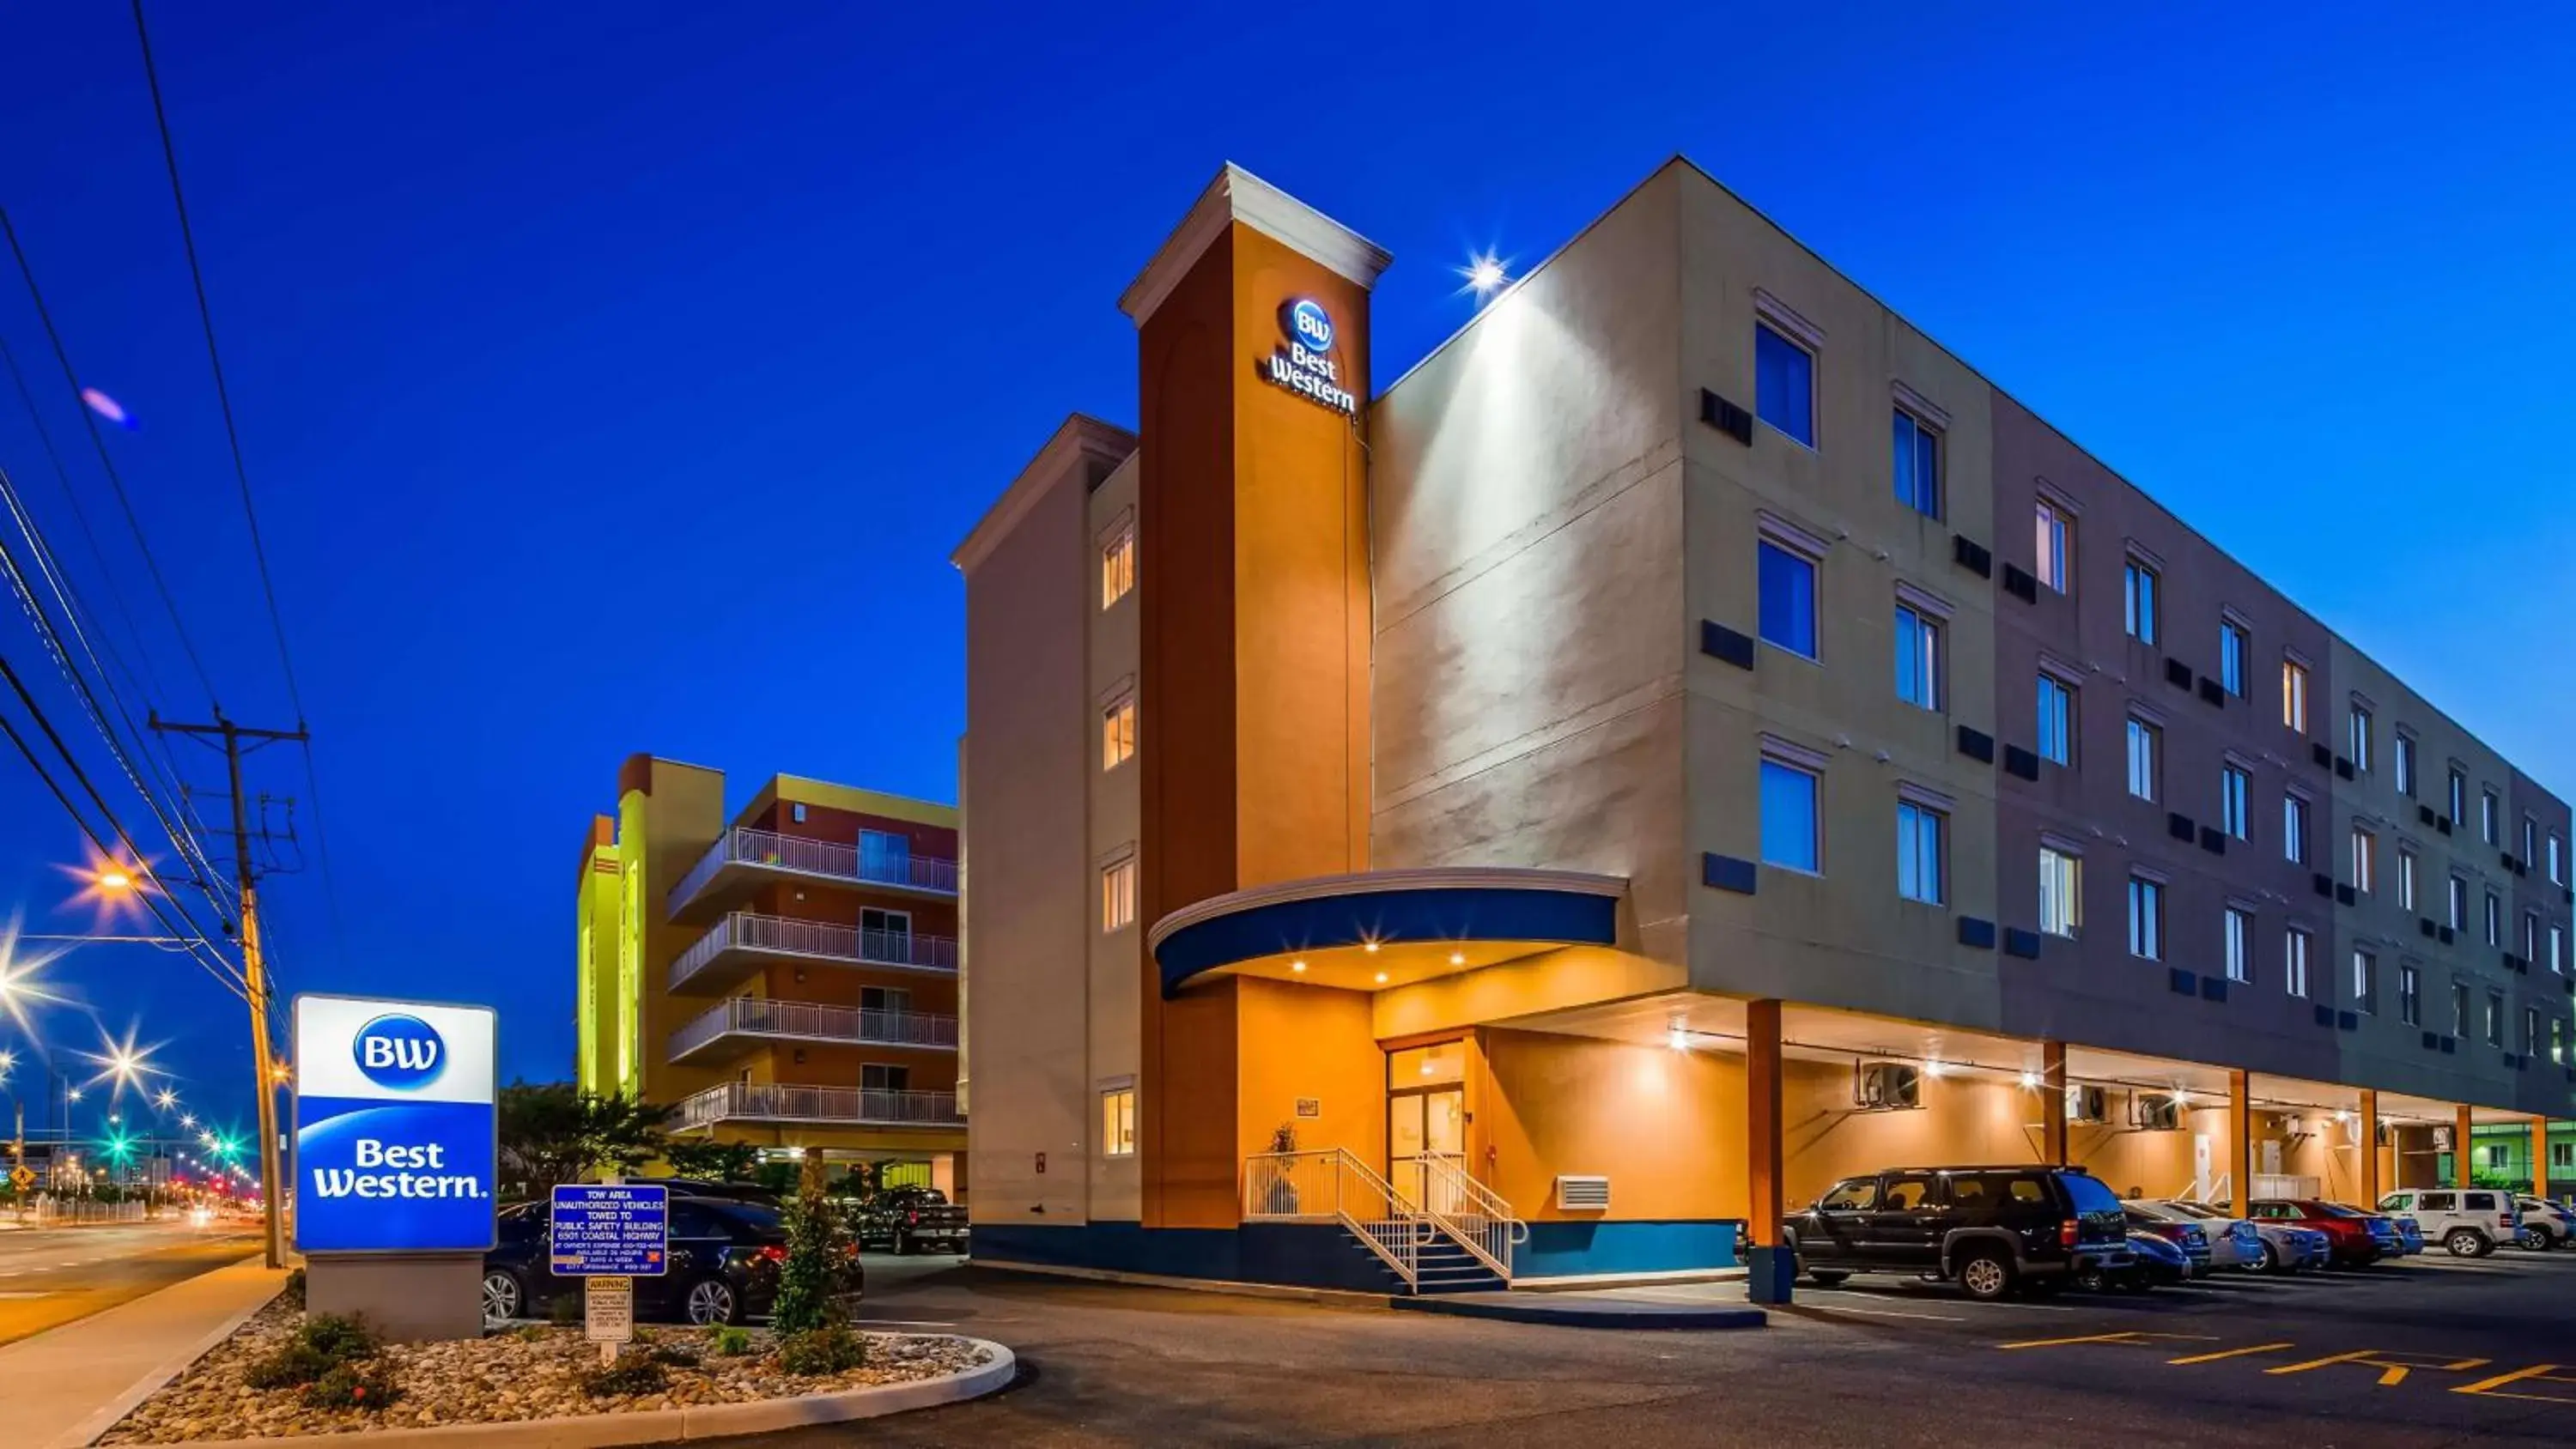 Property Building in Best Western Ocean City Hotel and Suites